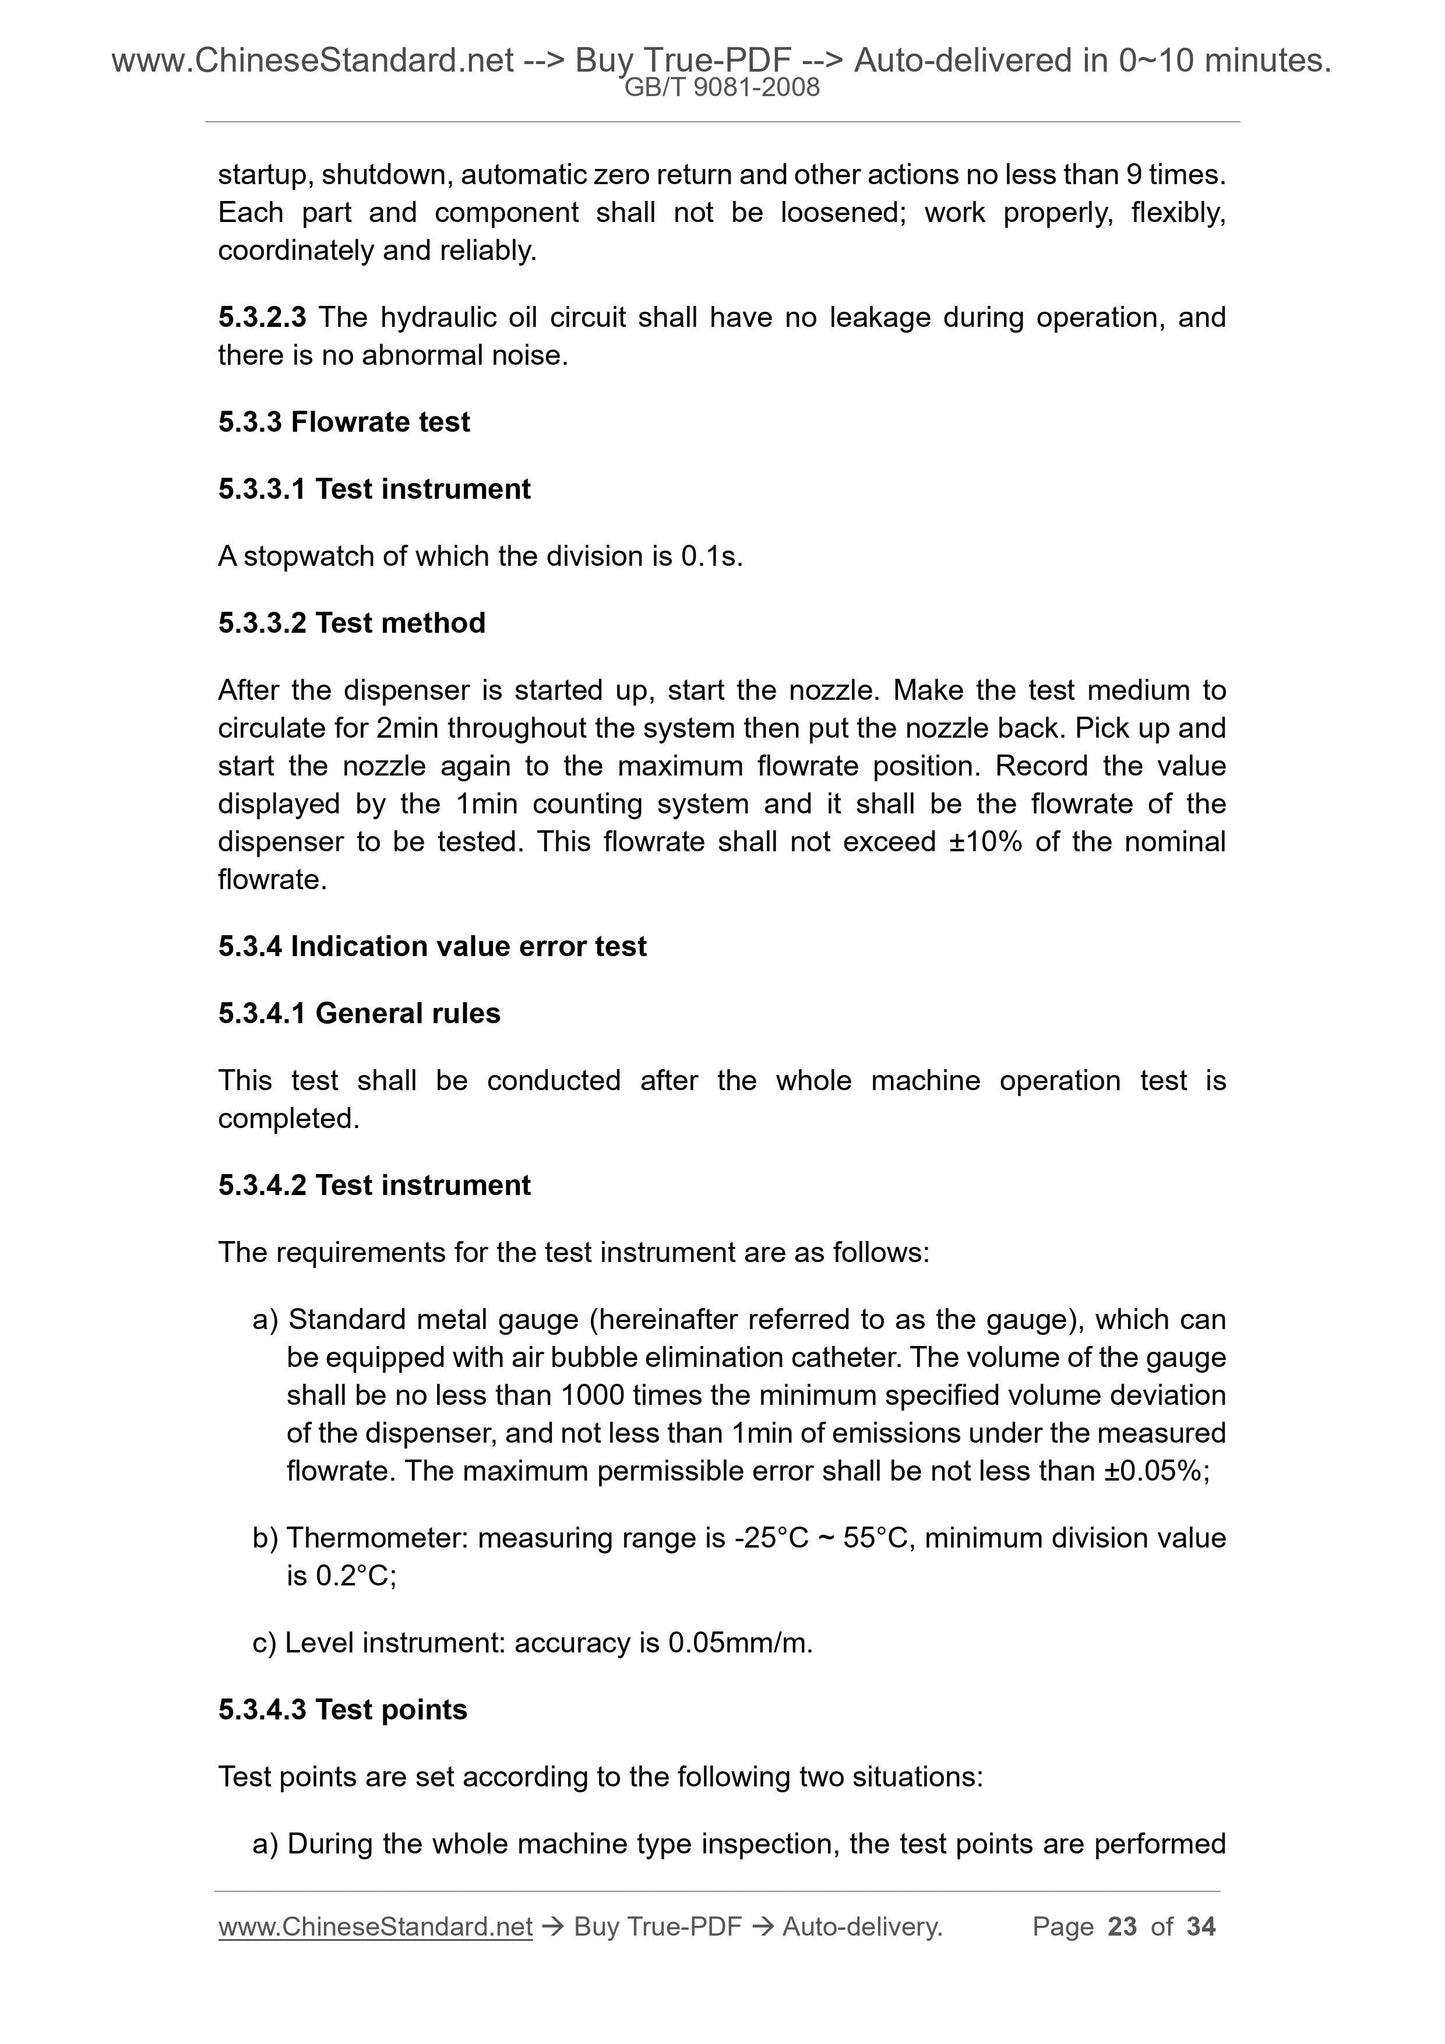 GB/T 9081-2008 Page 8